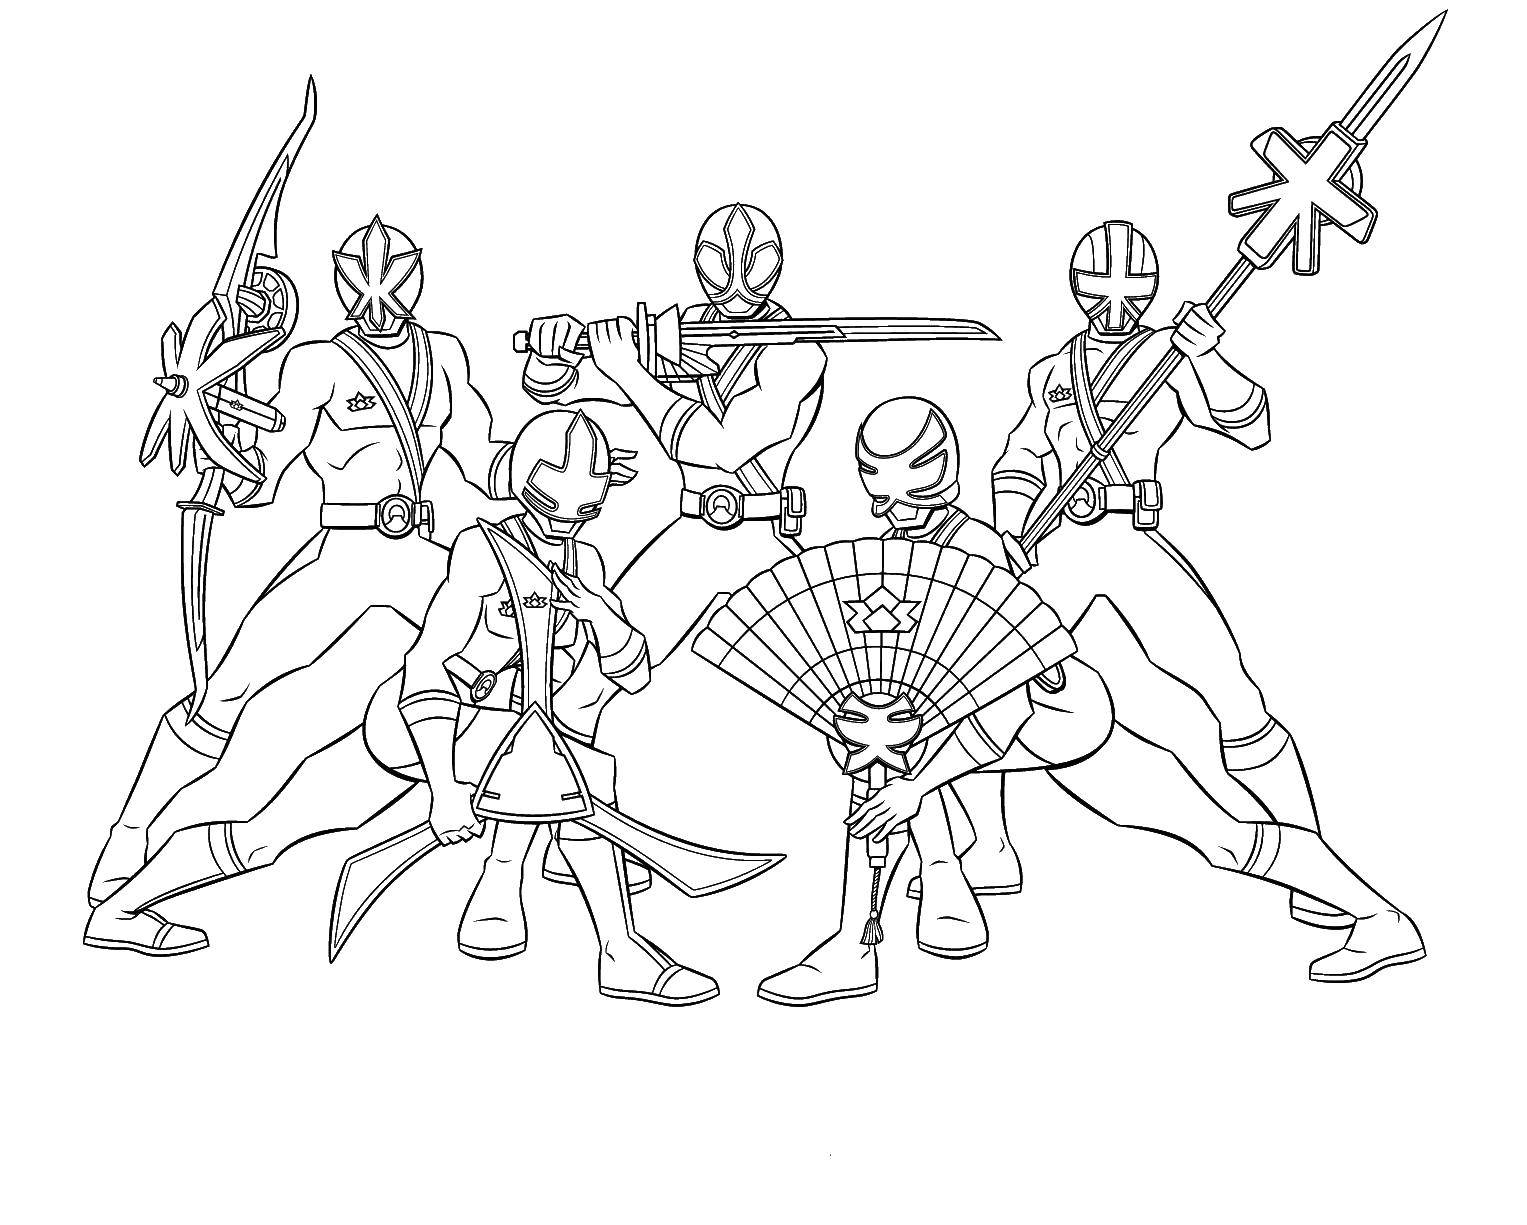 Coloring Power Rangers in battle. Category the Rangers . Tags:  power Rangers.